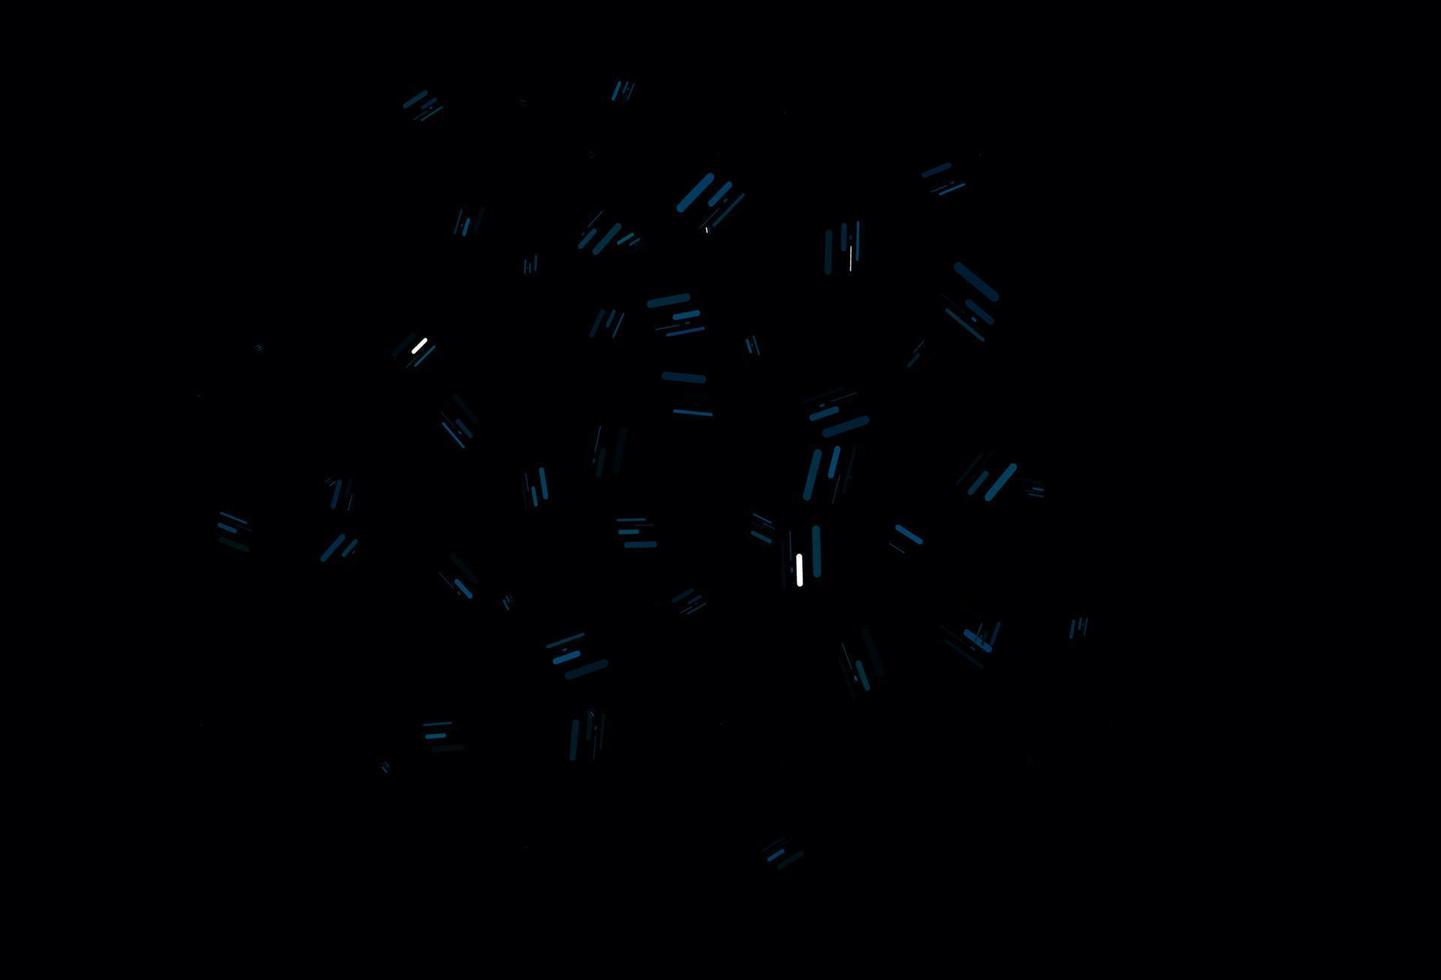 Light BLUE vector template with repeated sticks.